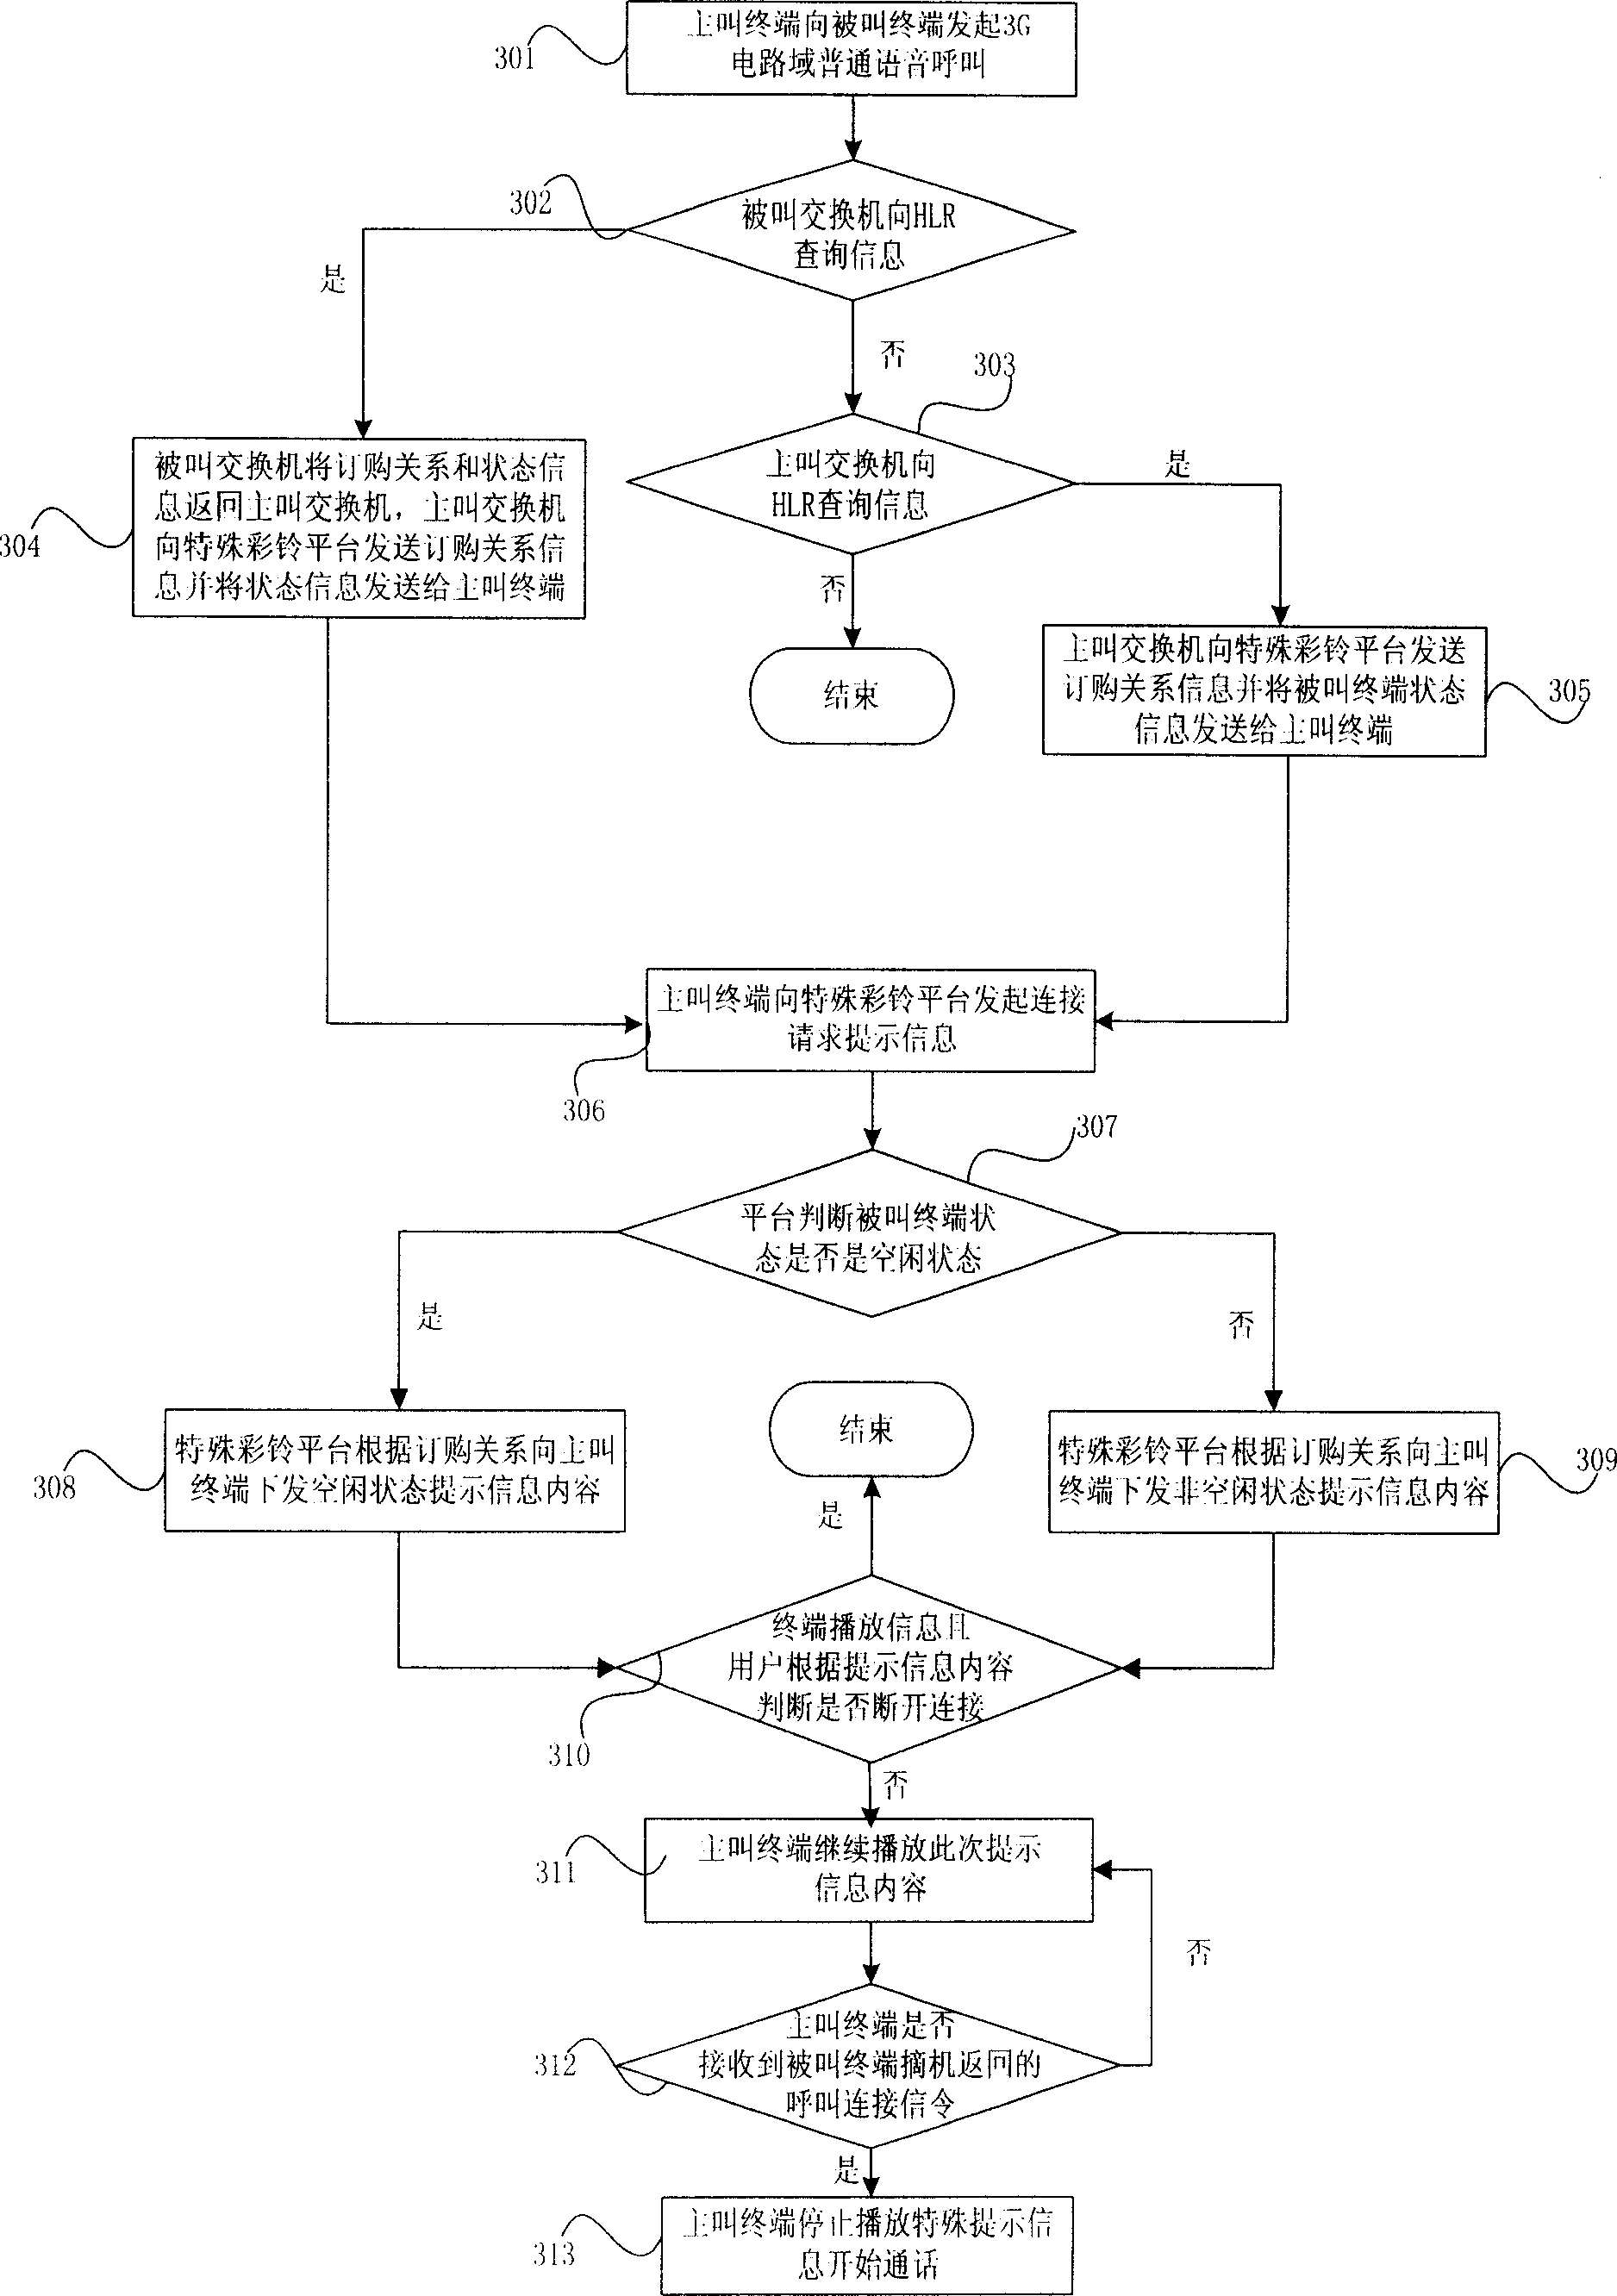 Method for providing prompt information to mobile communication device by mobile communication network